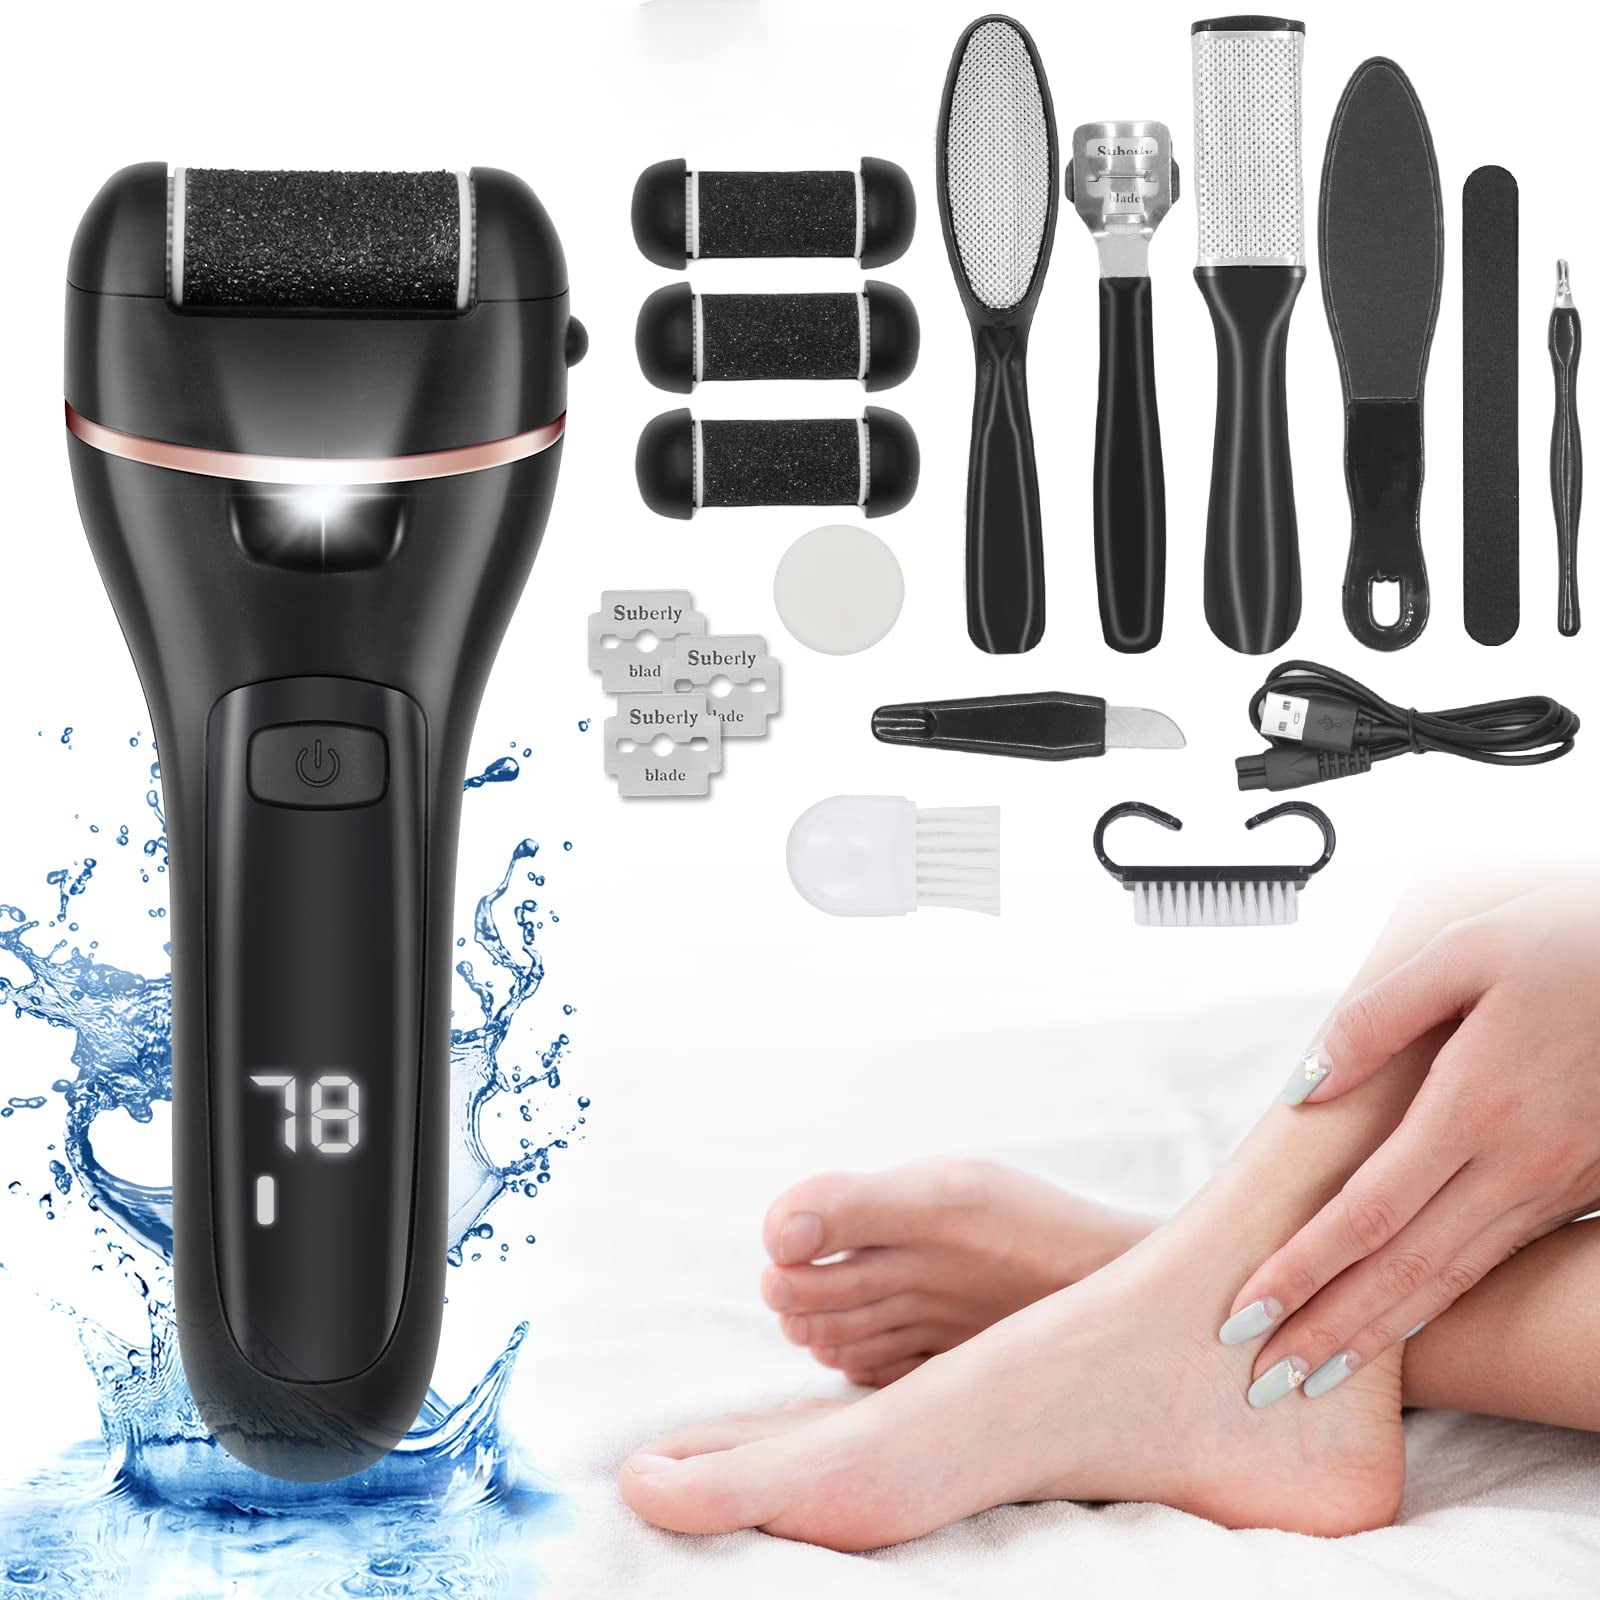 Electric Foot Callus Remover, Rechargeable Portable Electronic Foot File  Pedicure Kits, Callus Remover Tools, Foot Scrubber File, Professional  Pedicure Tools, Foot Care for Dead Skin Ideal Gift